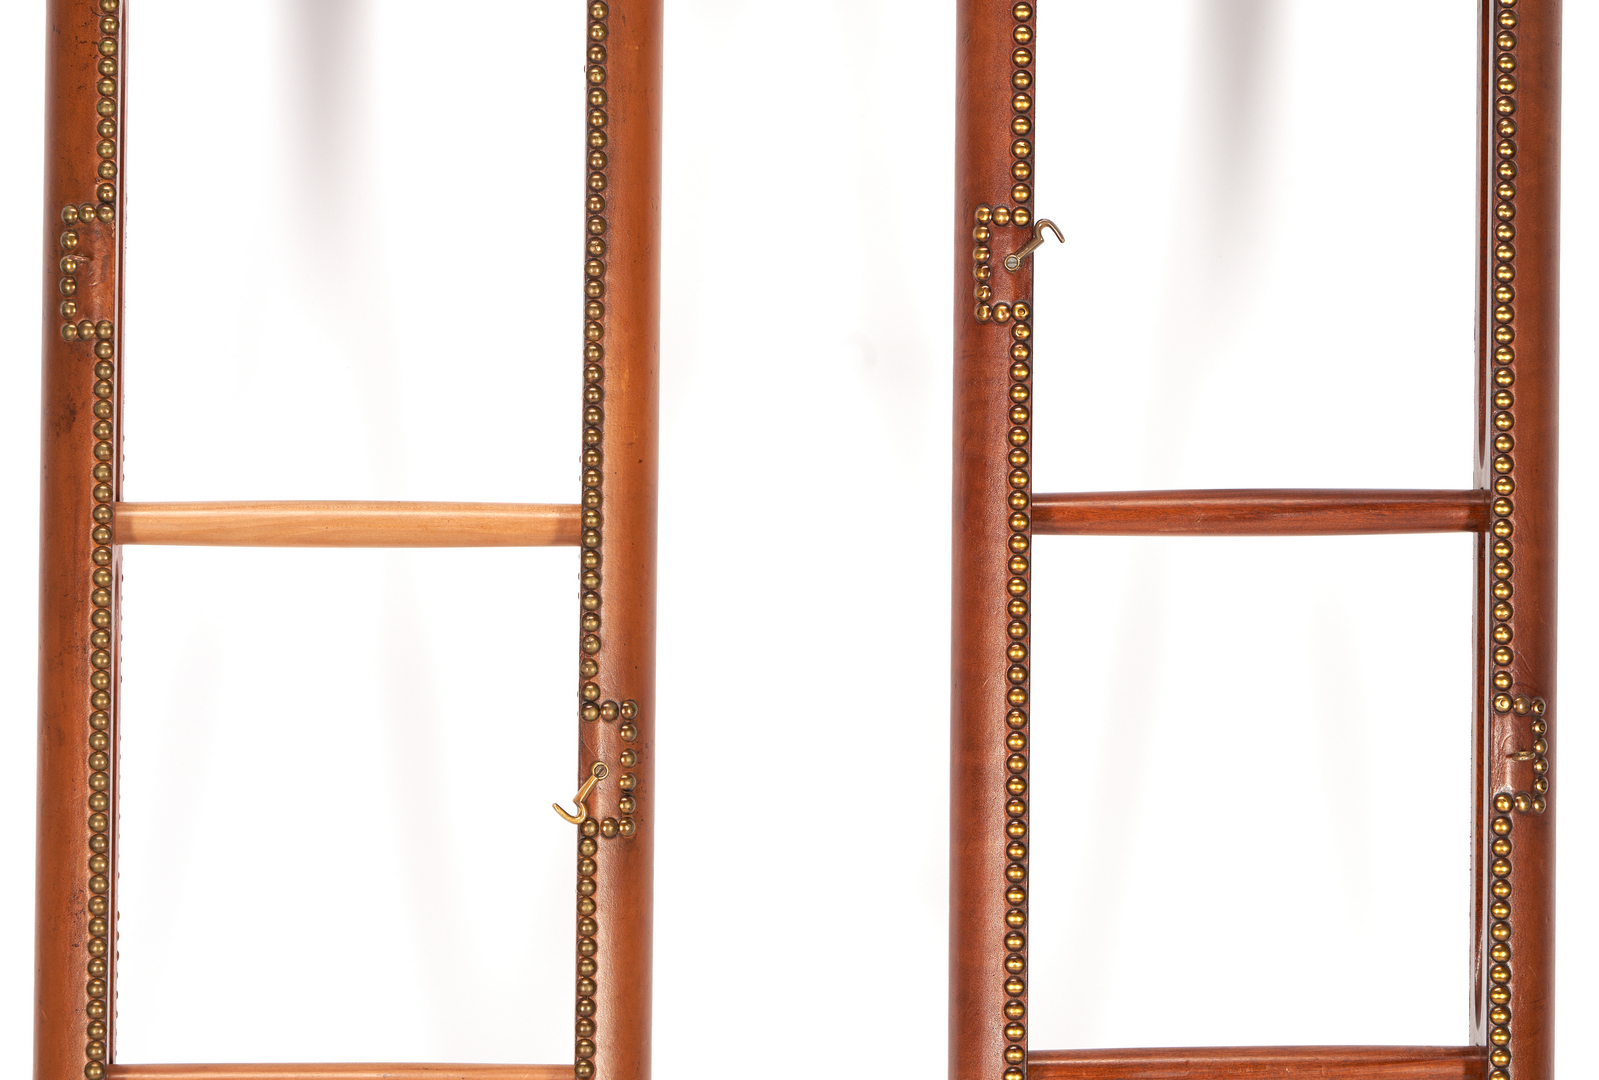 Lot 287: Two English Cased Folding Library Ladders